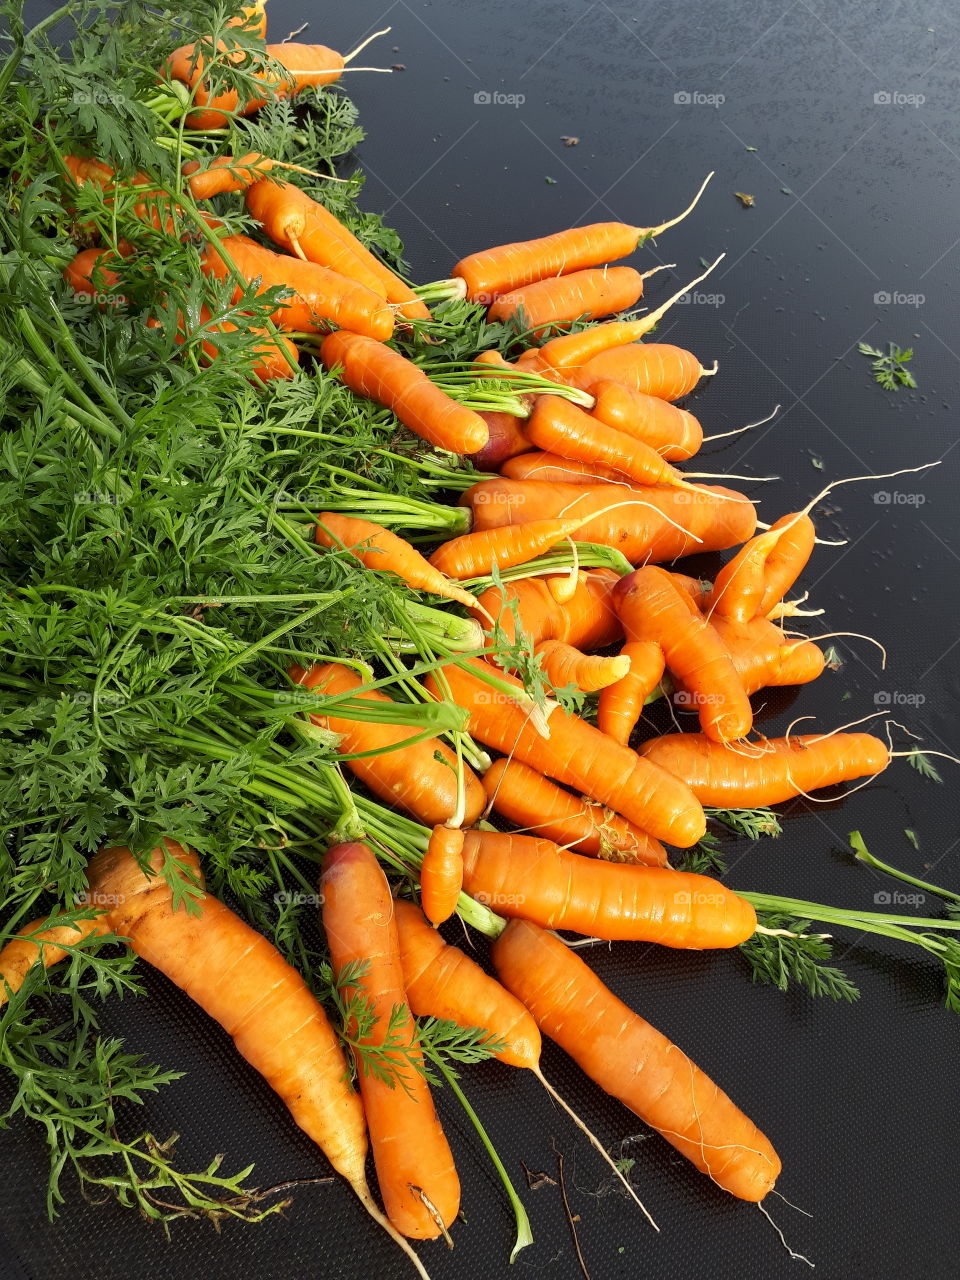 Freshly dug washed carrots, bright vibrant orange with attached greens.